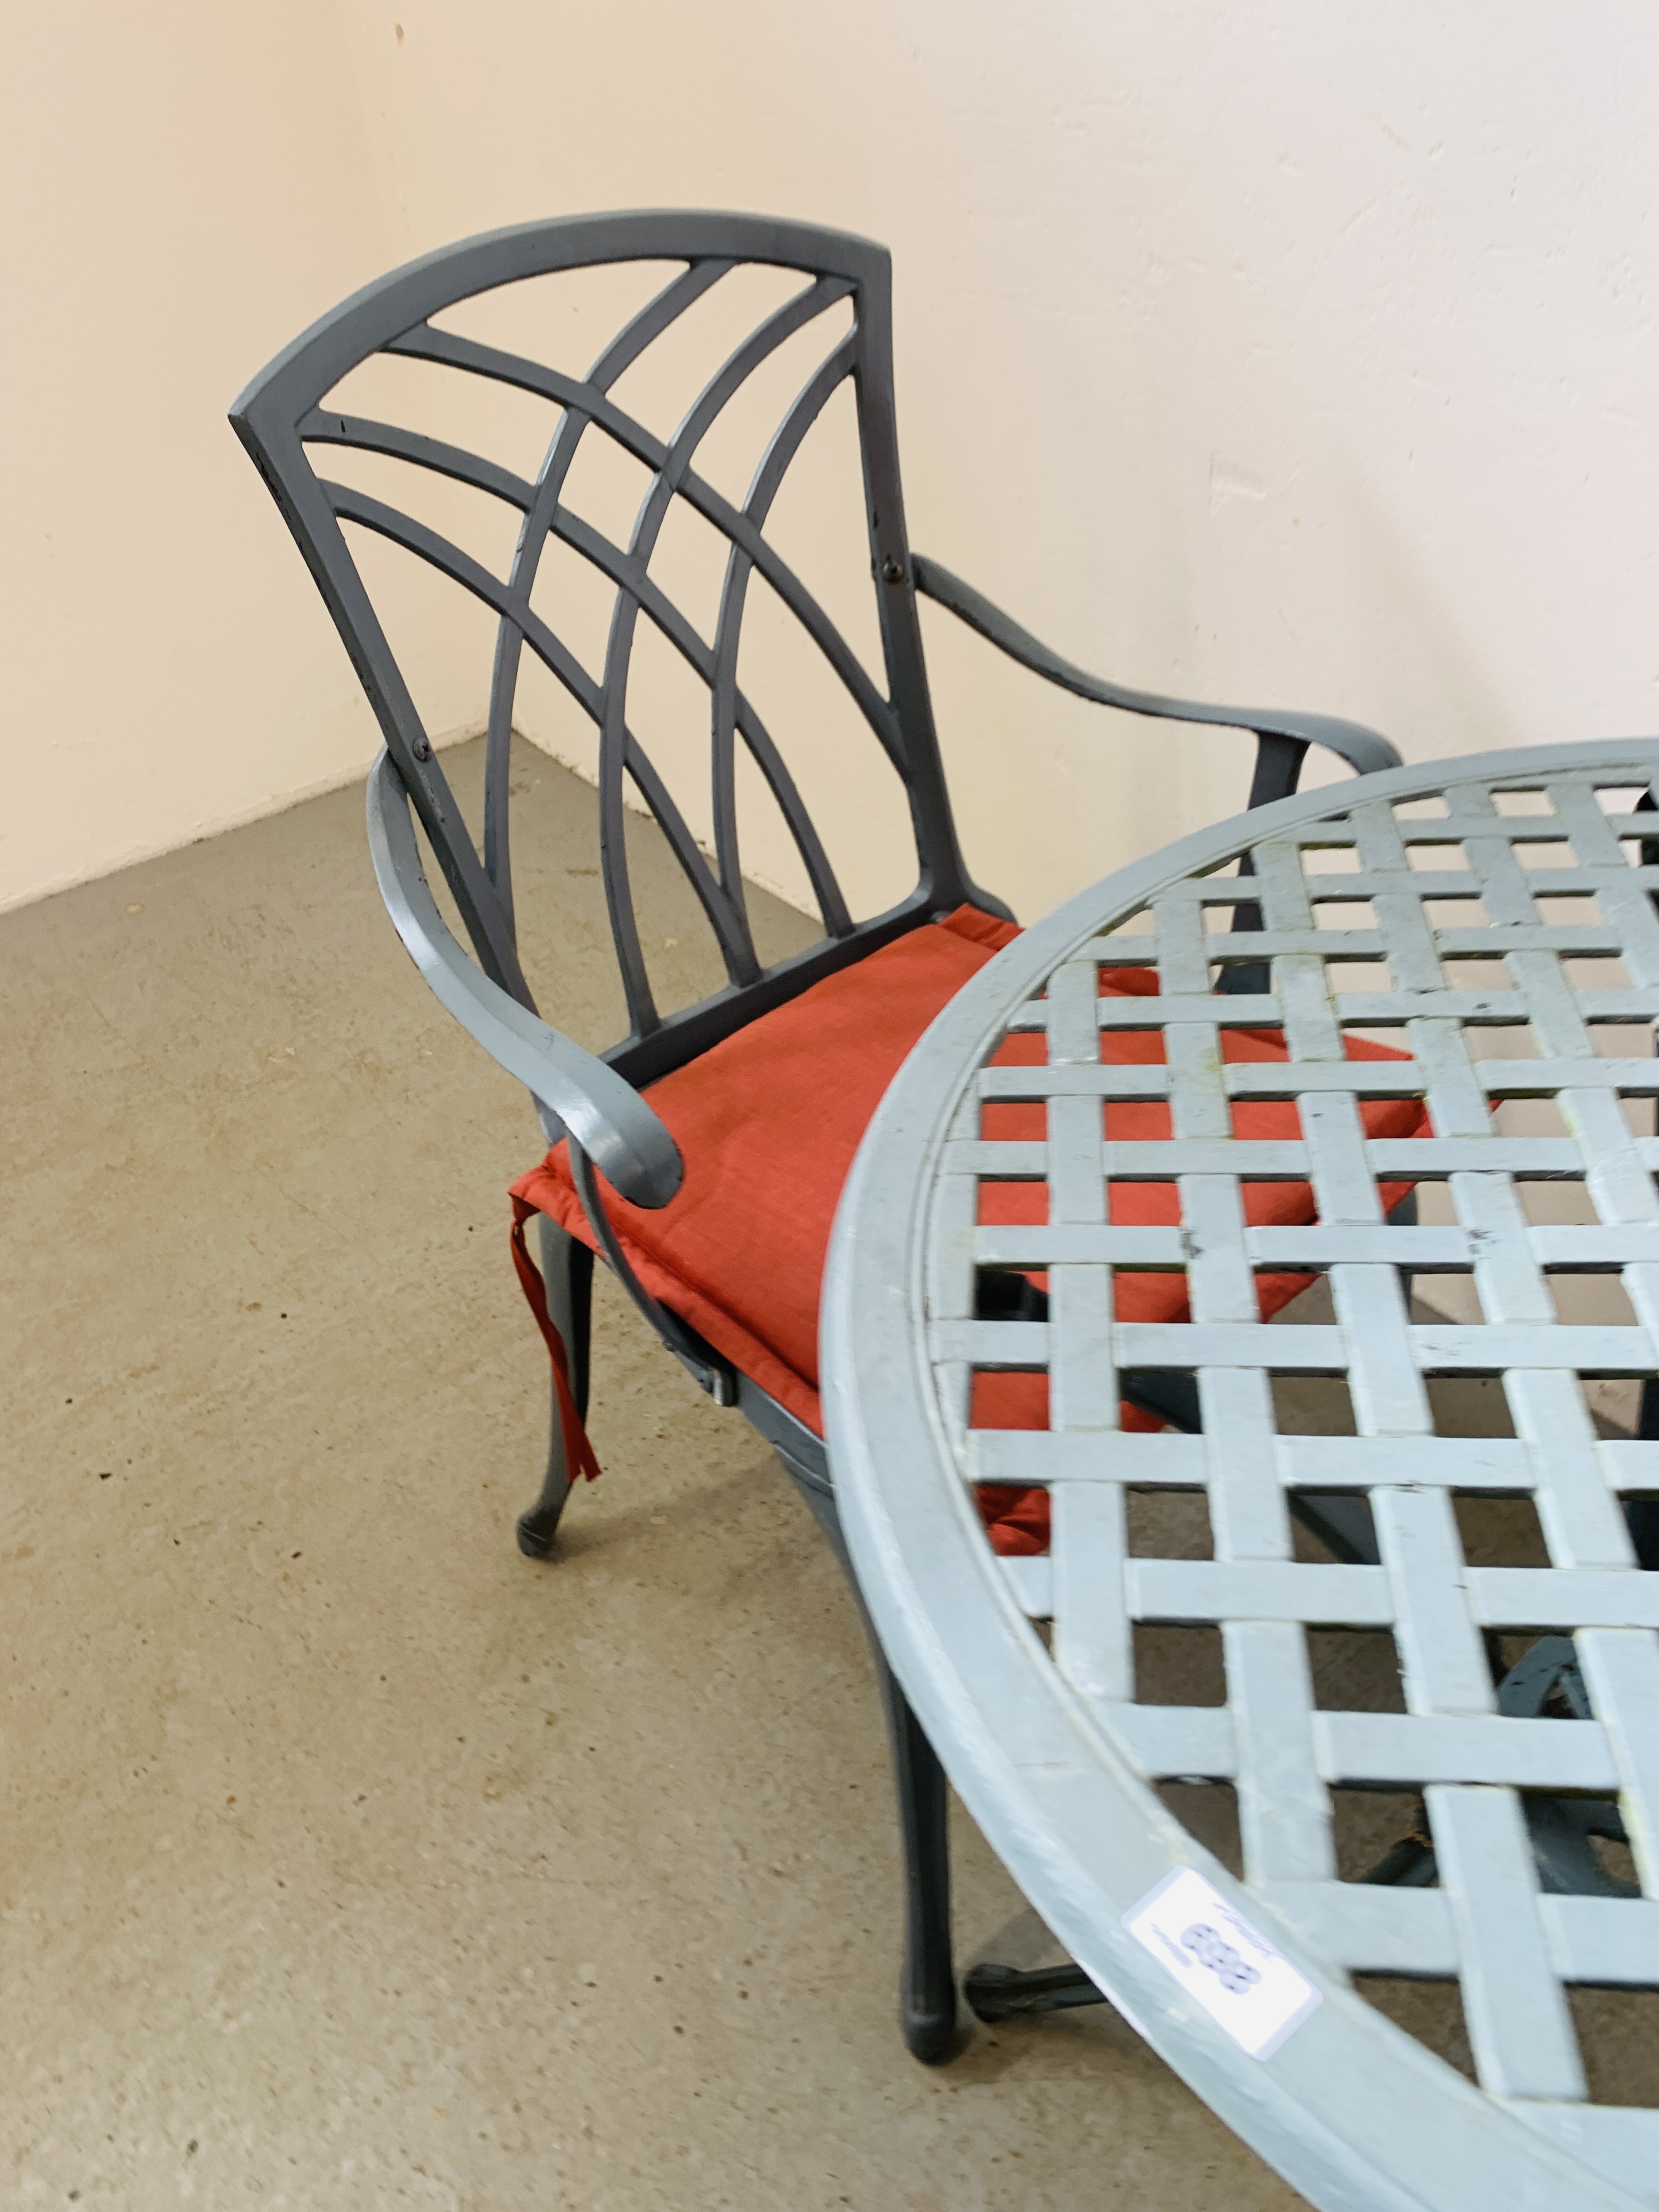 A CAST ALUMINIUM PATIO BISTRO SET COMPRISING CIRCULAR TABLE AND TWO CHAIRS WITH SEAT CUSHIONS - Image 5 of 6